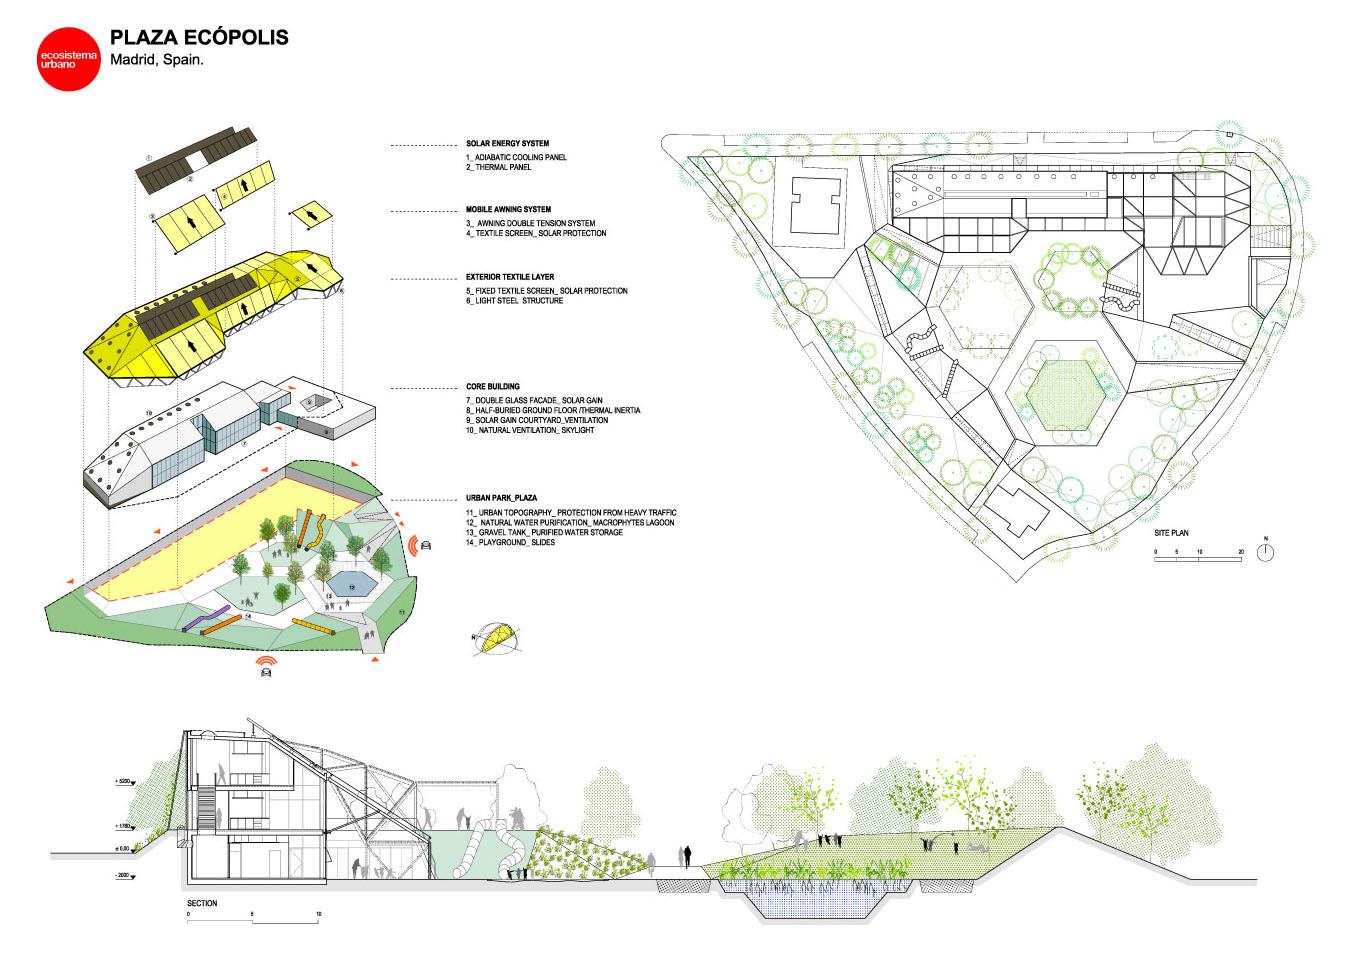 Site plans and drawings of the Exopolis Plaza by Ecosistema Urbano